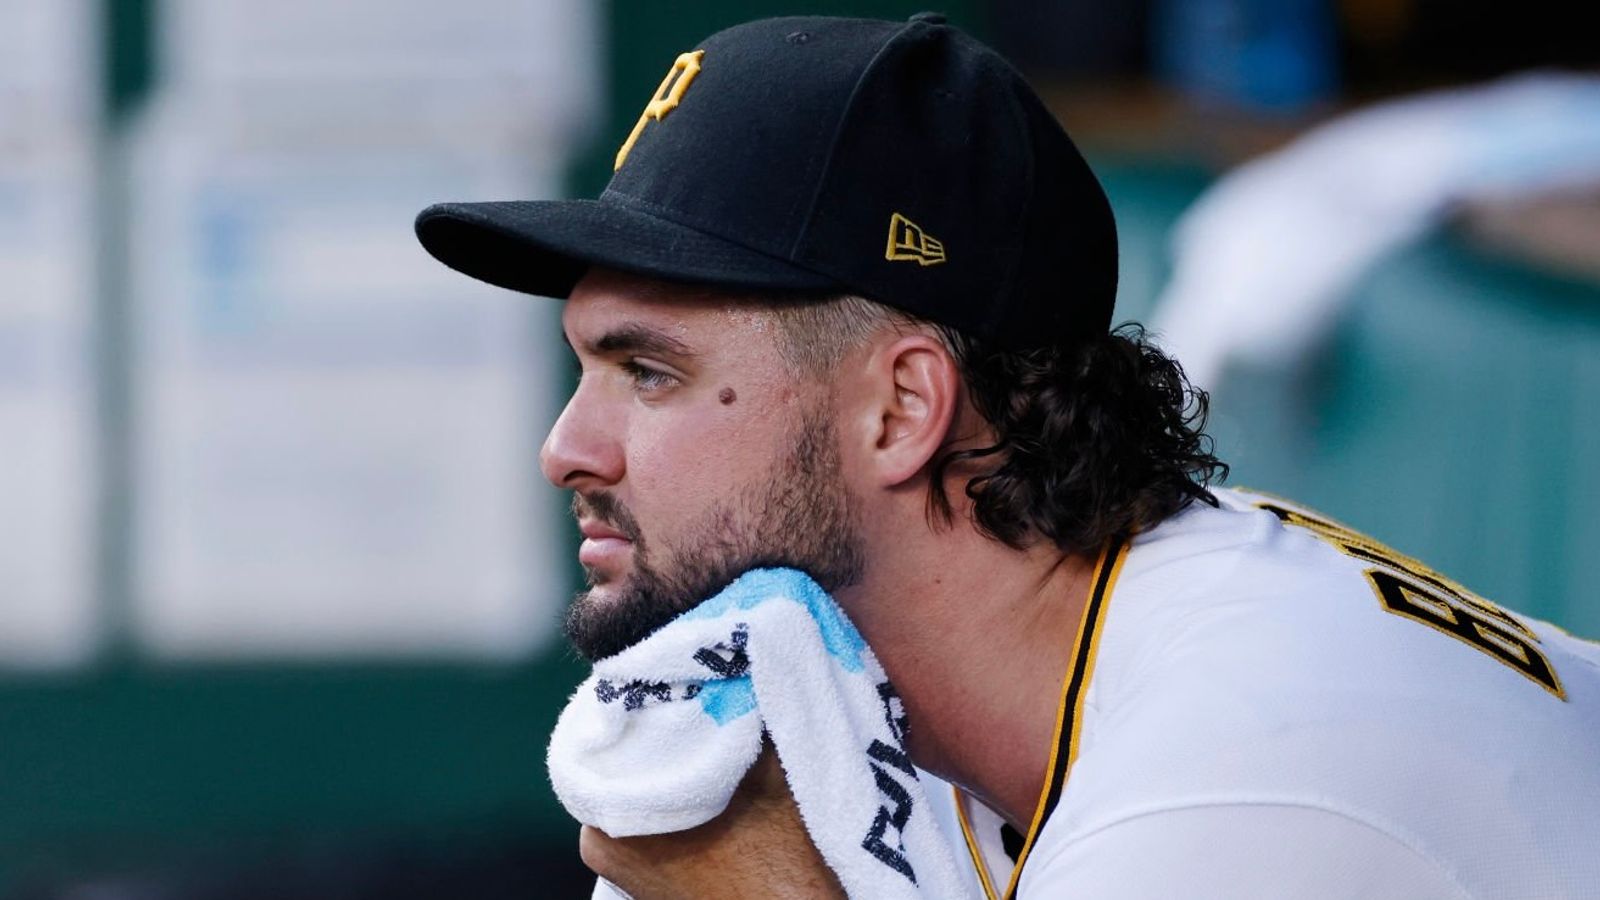 All aspects coming together for Pirates' Cole in 2015